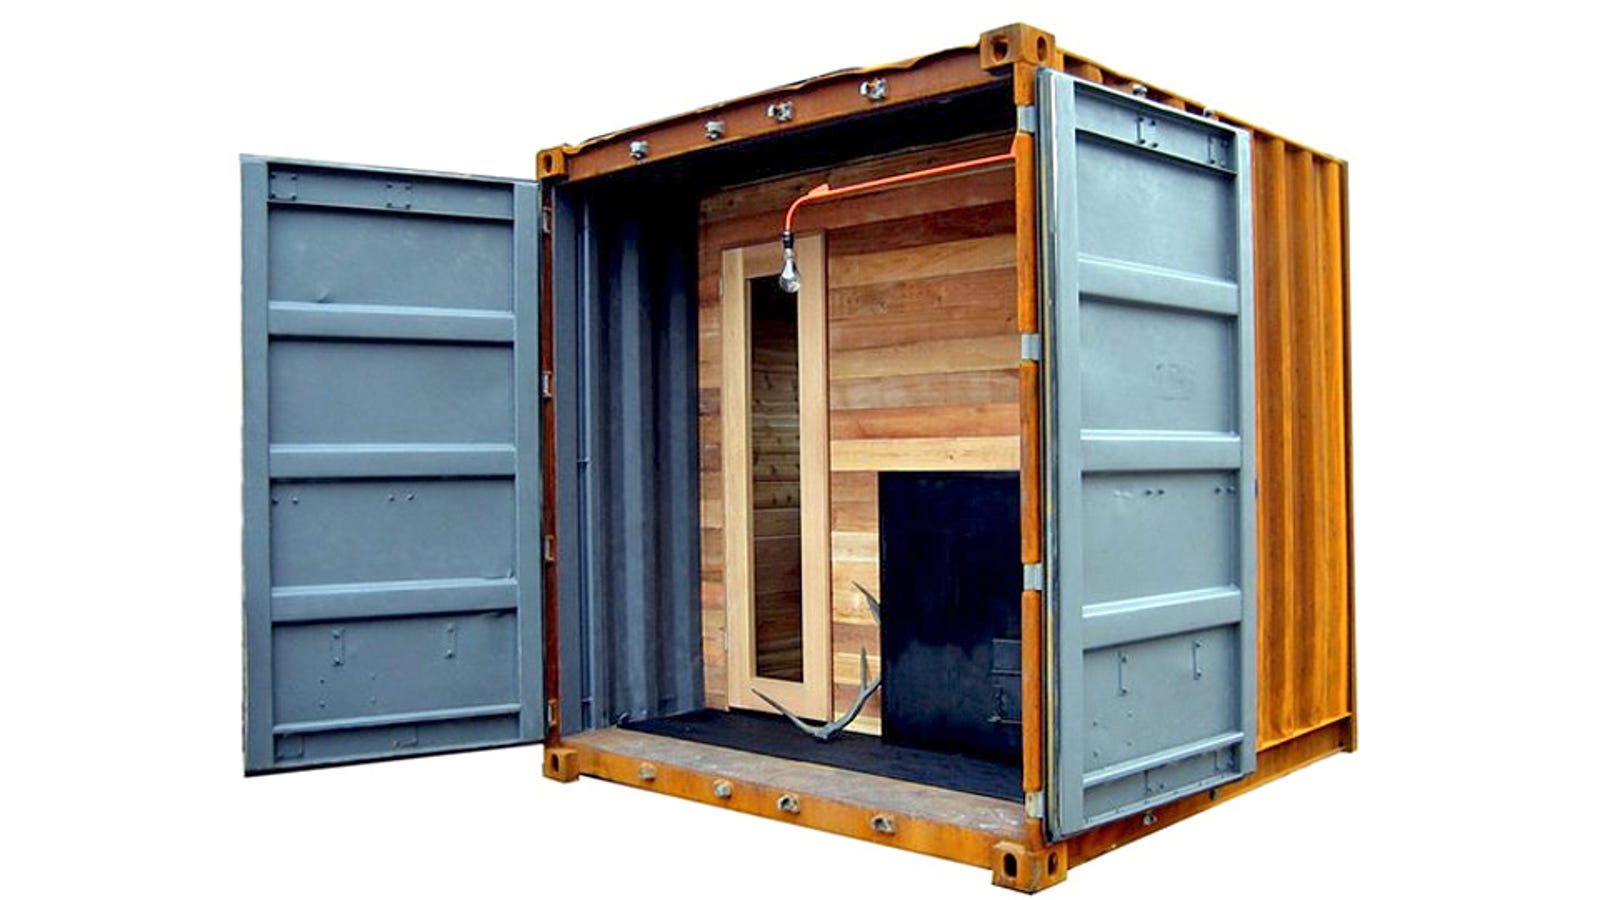 A Portable Shipping Container Sauna Is the Ultimate Stress Toy